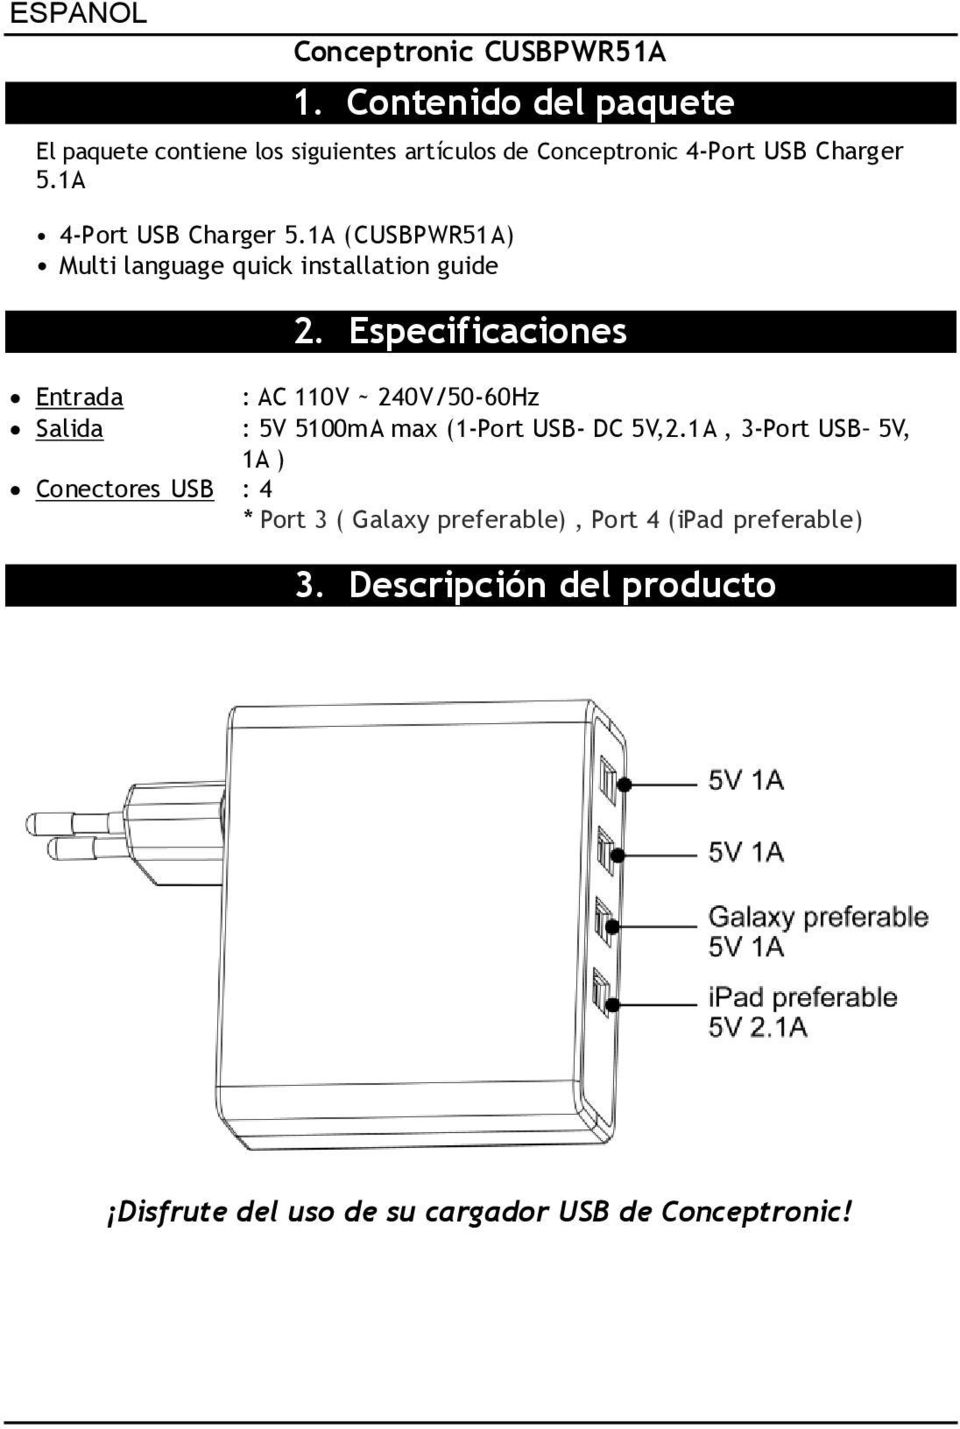 4-Port USB Charger 5.1A 2.